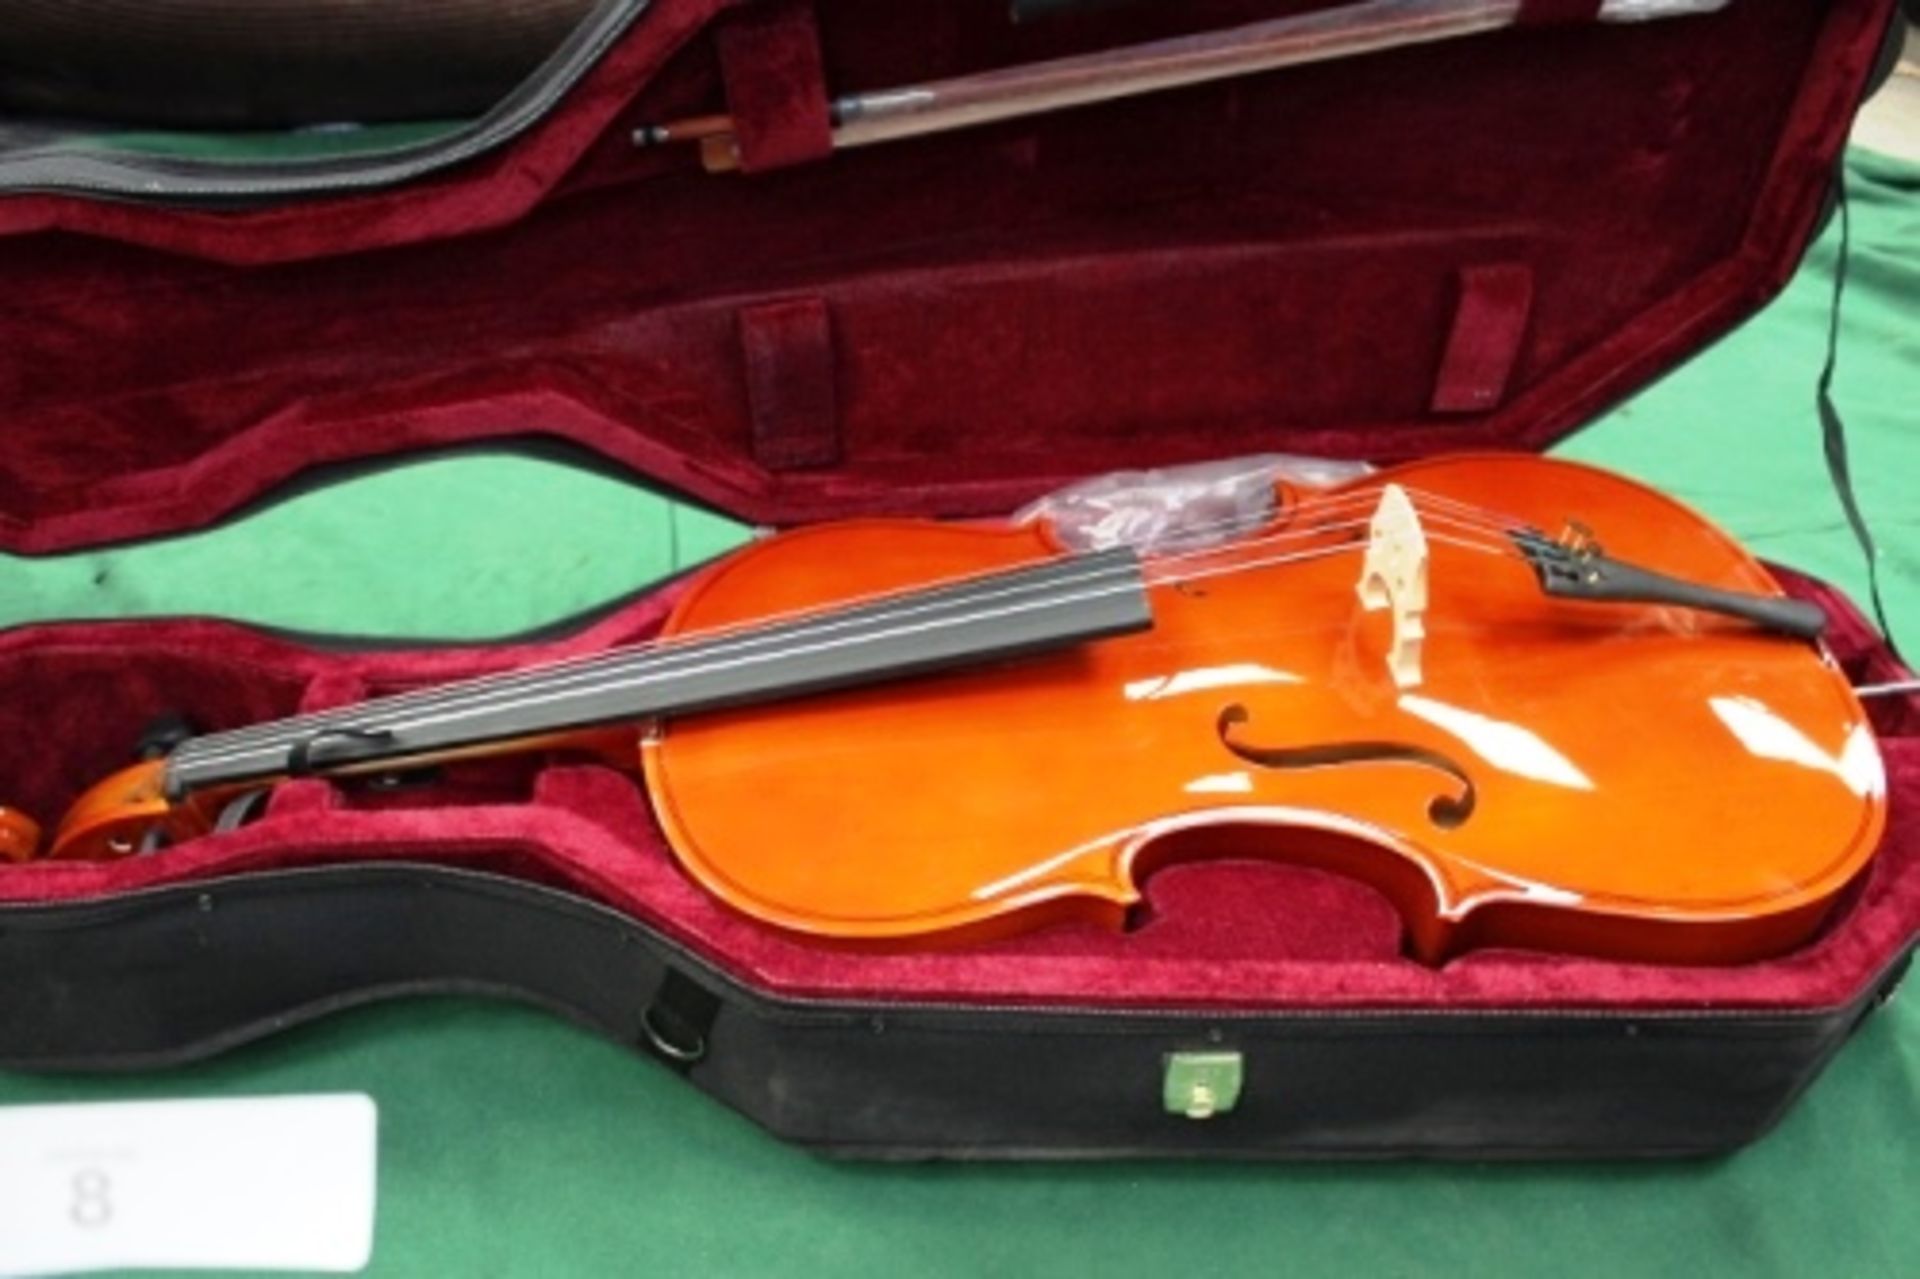 A cello with repaired neck, comes with carry case, music stand and spare strings - New (cabsfloor)